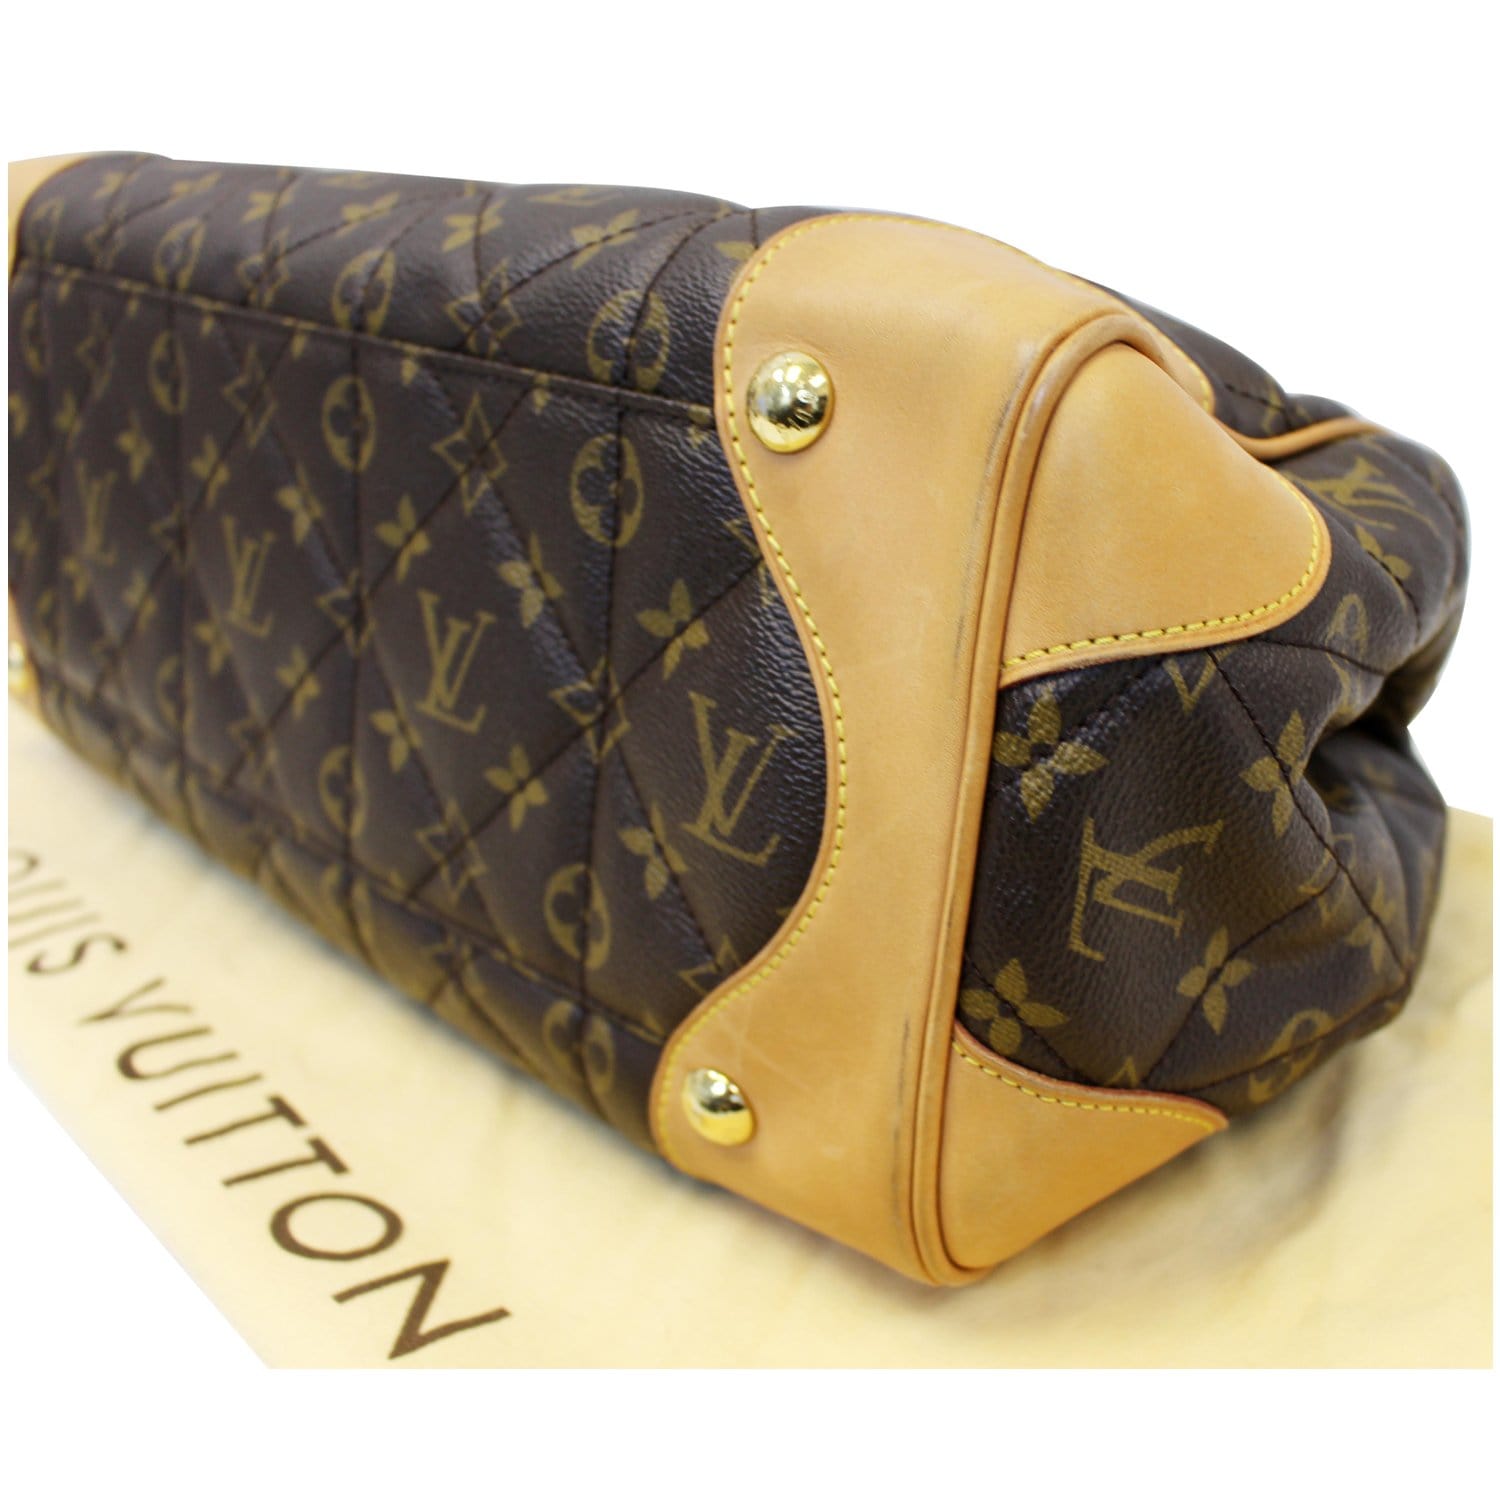 Louis Vuitton Brown/Beige Monogram Quilted Coated Canvas & Leather Etoile  Shopper Bag - ShopStyle